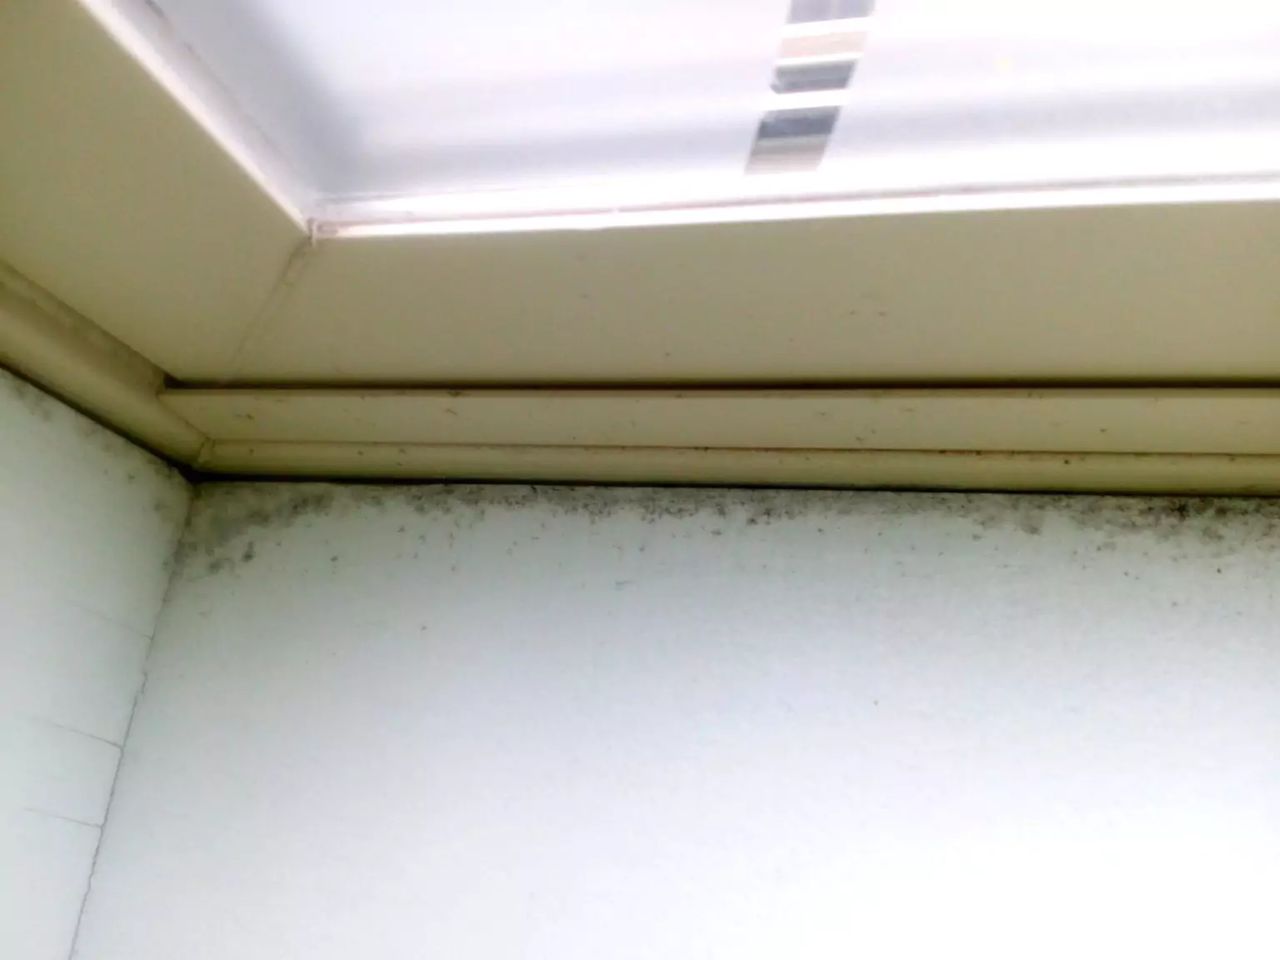 How to remove mold from a windowsill Photo: Imgur